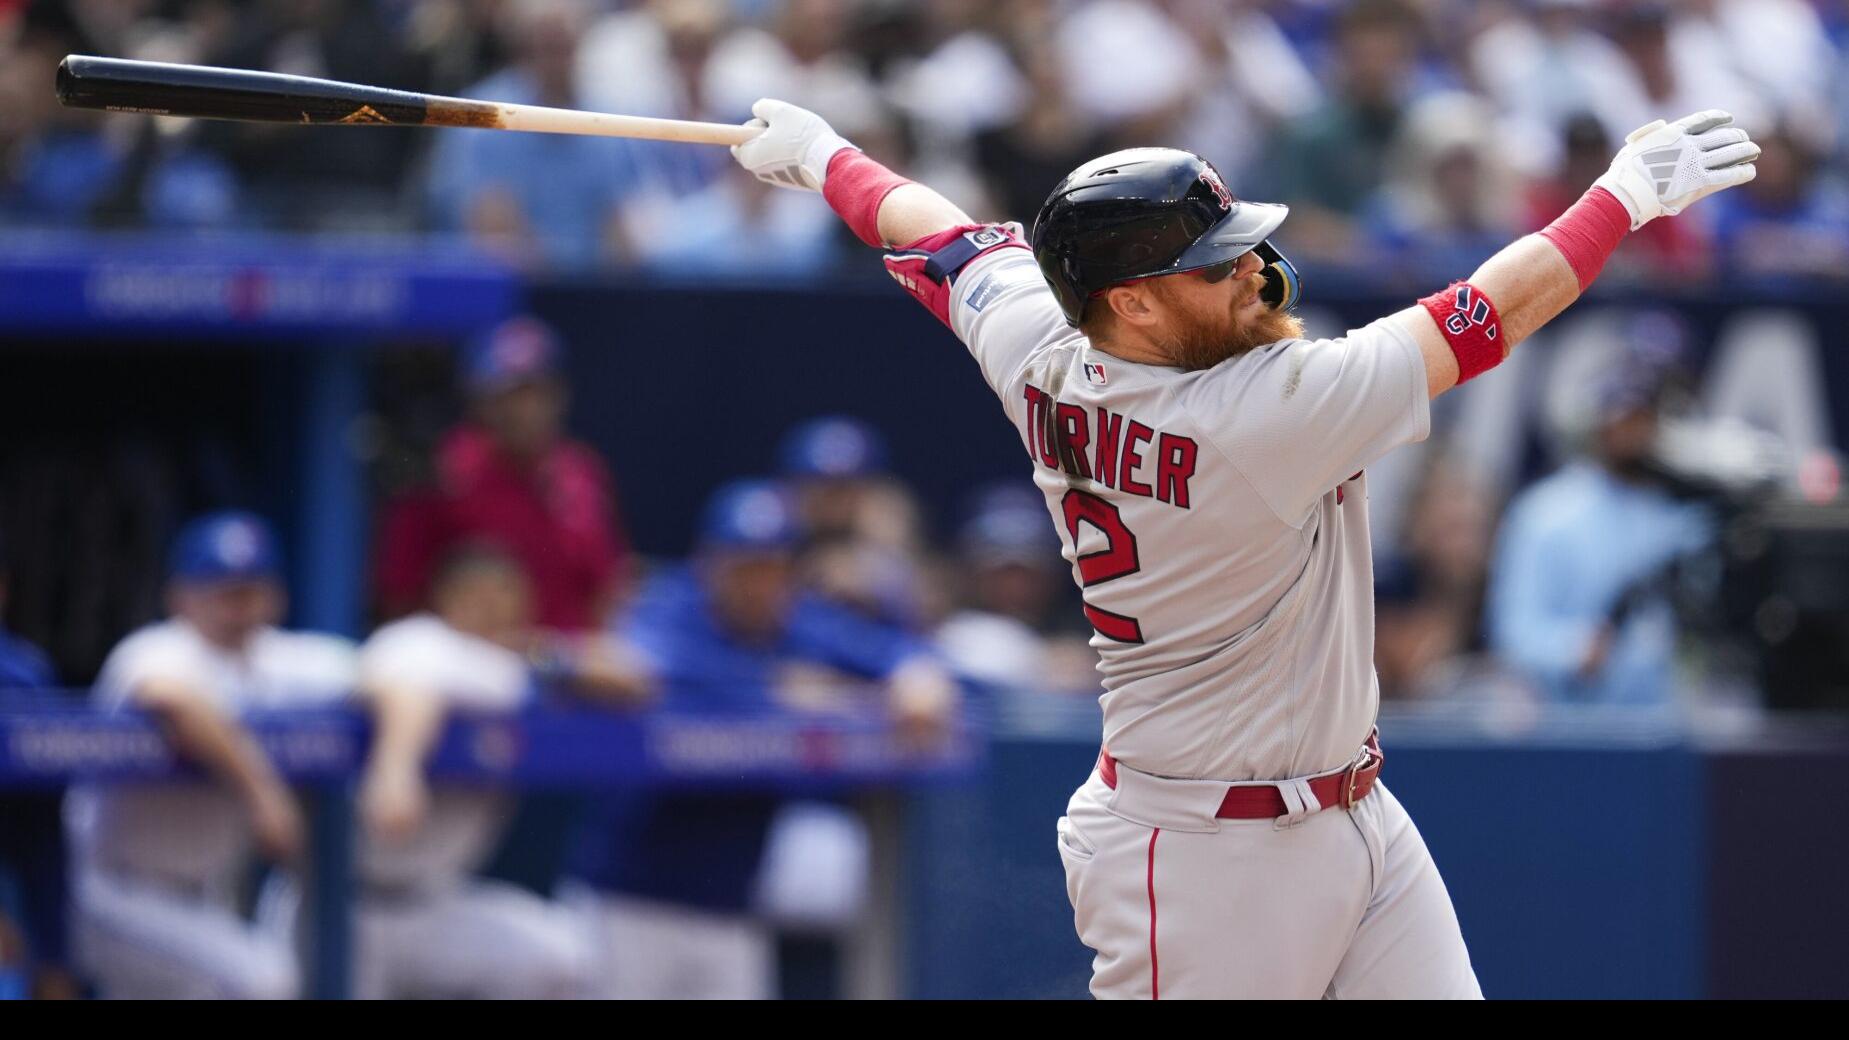 New Jay Justin Turner's favourite position? 'In the lineup.'